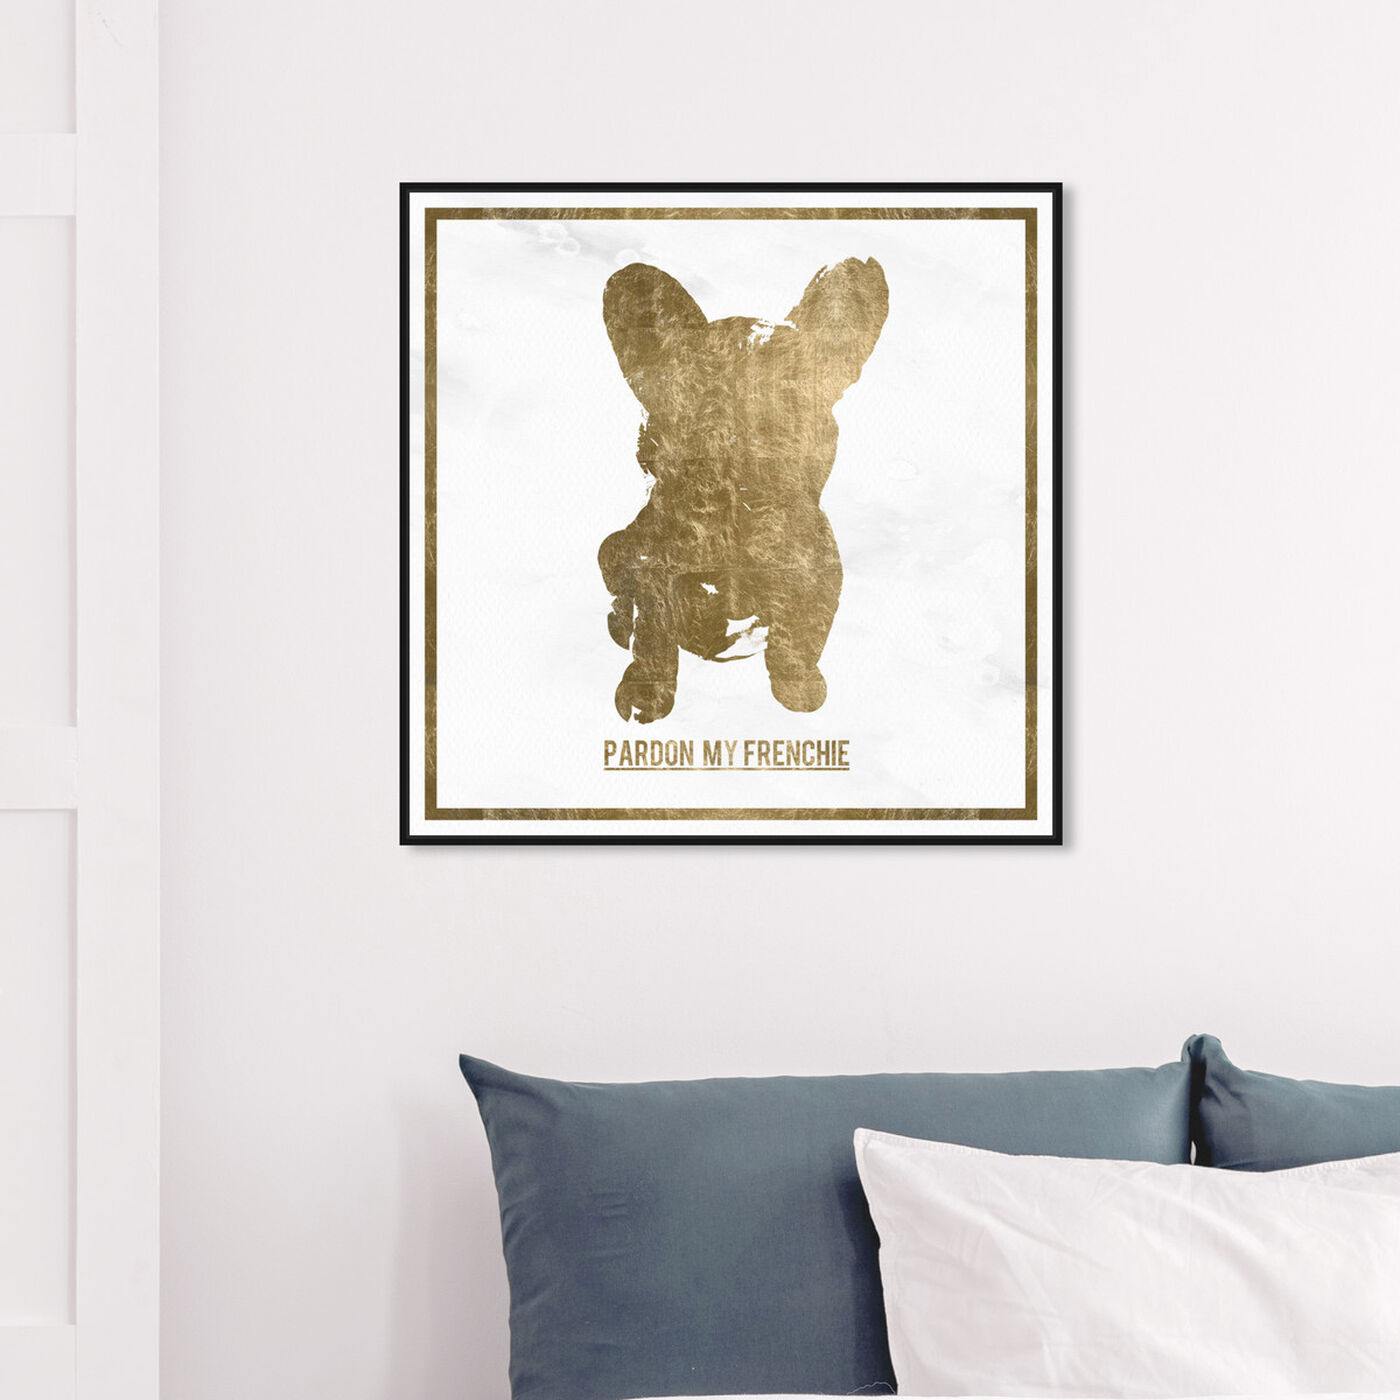 Hanging view of Pardon my Frenchie featuring animals and dogs and puppies art.